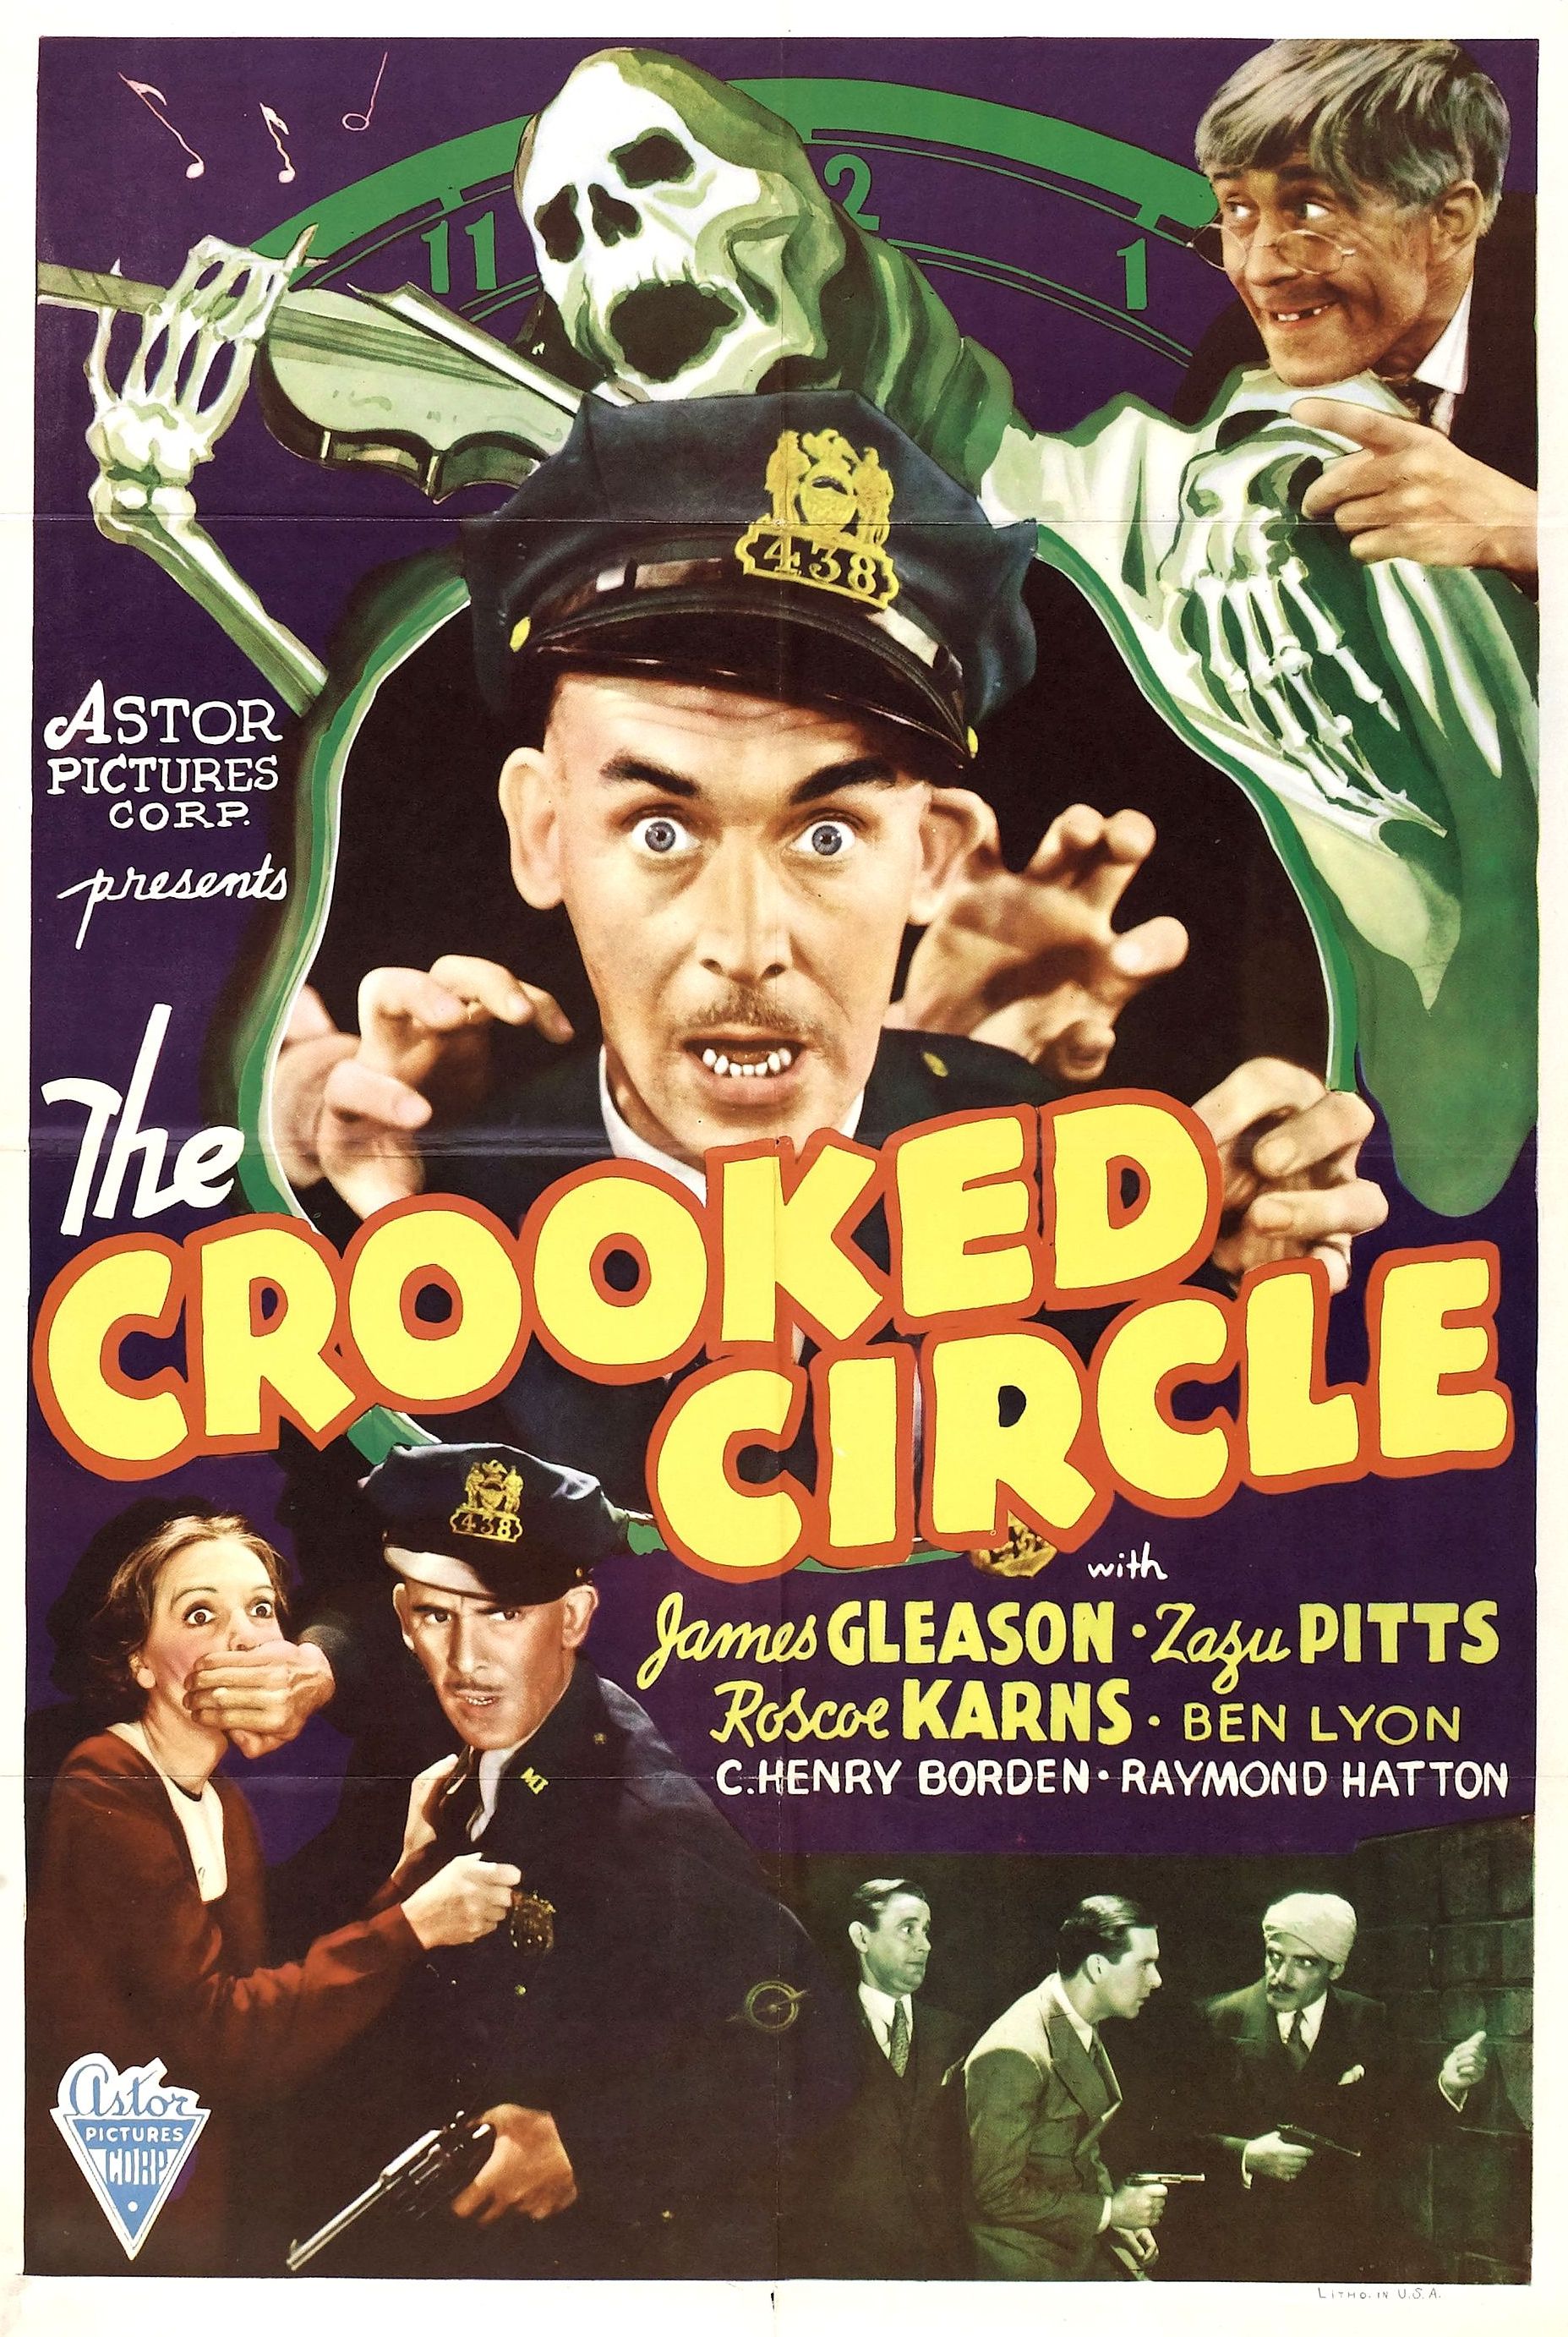 THE CROOKED CIRCLE (1932)